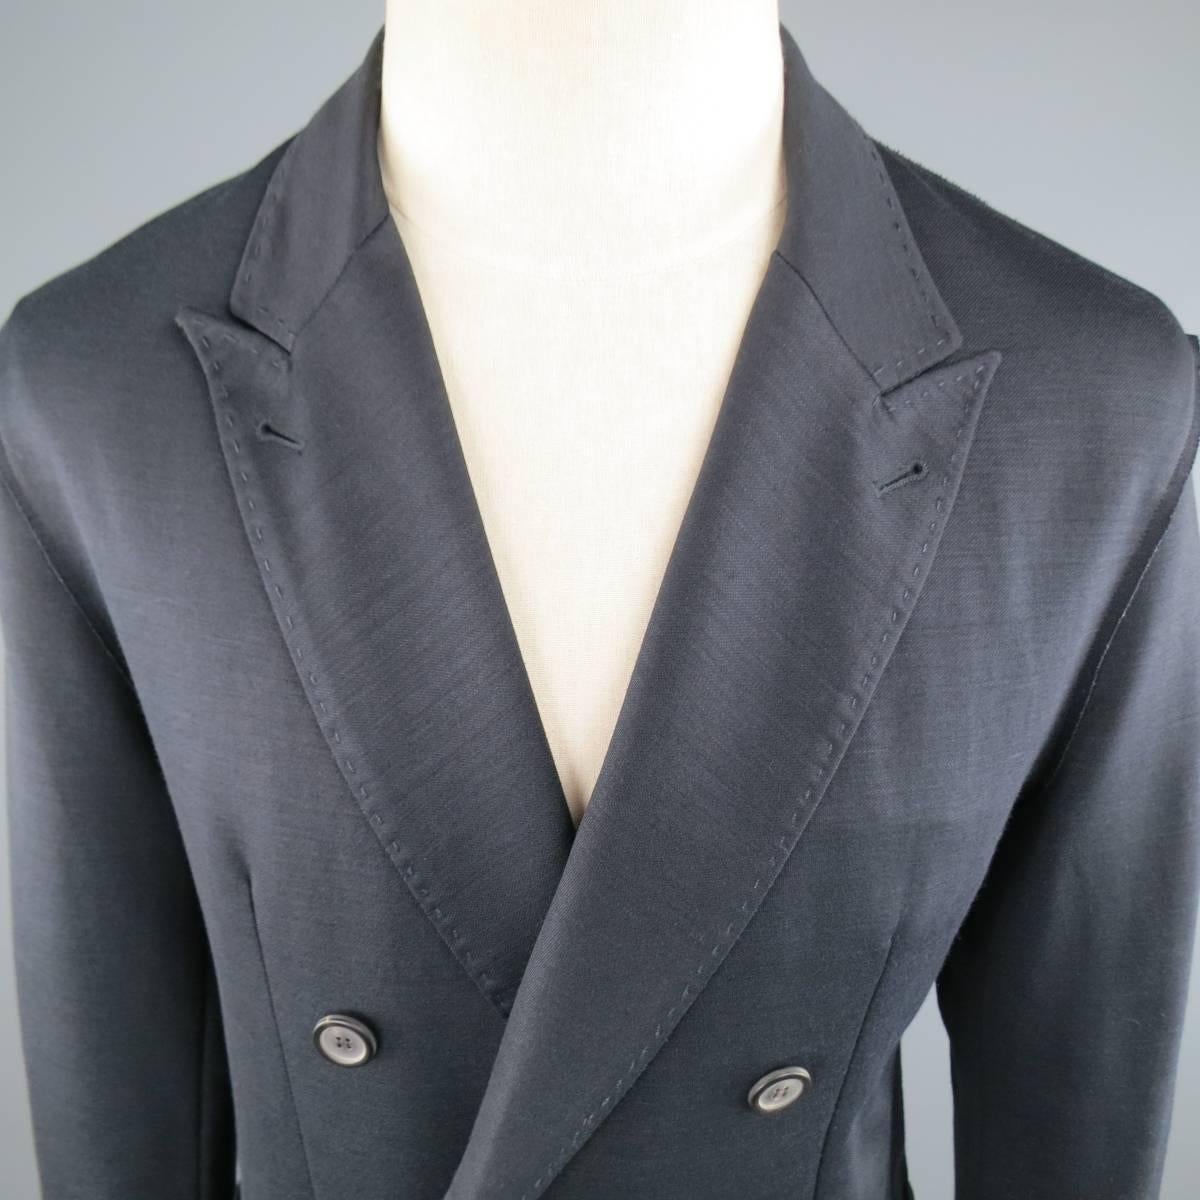 Casual LANVIN sport coat in a navy blue stretch ramie blend jersey featuring a peak lapel, double breasted closure, patch pockets, top stitching, and reverse raw edge seams throughout. Made in Romania.
 
Excellent Pre-Owned Condition.
Marked: T 50
